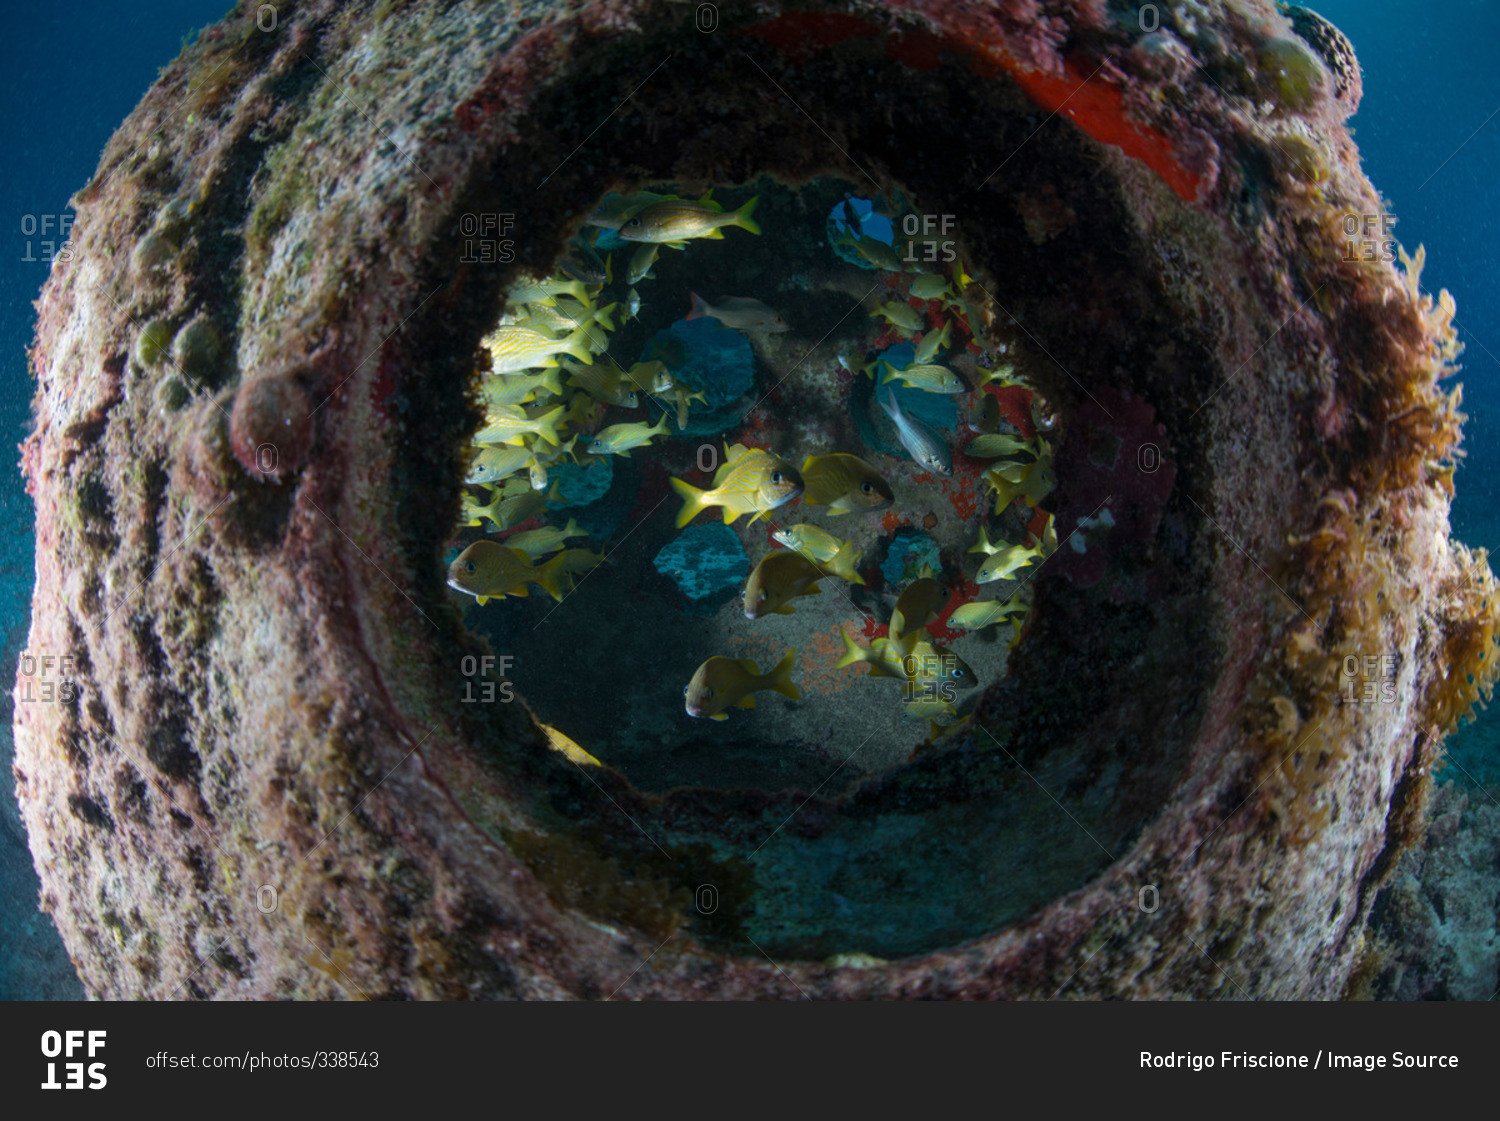 Underwater view through artificial reef of colorful fish, Cozumel Island, Mexico